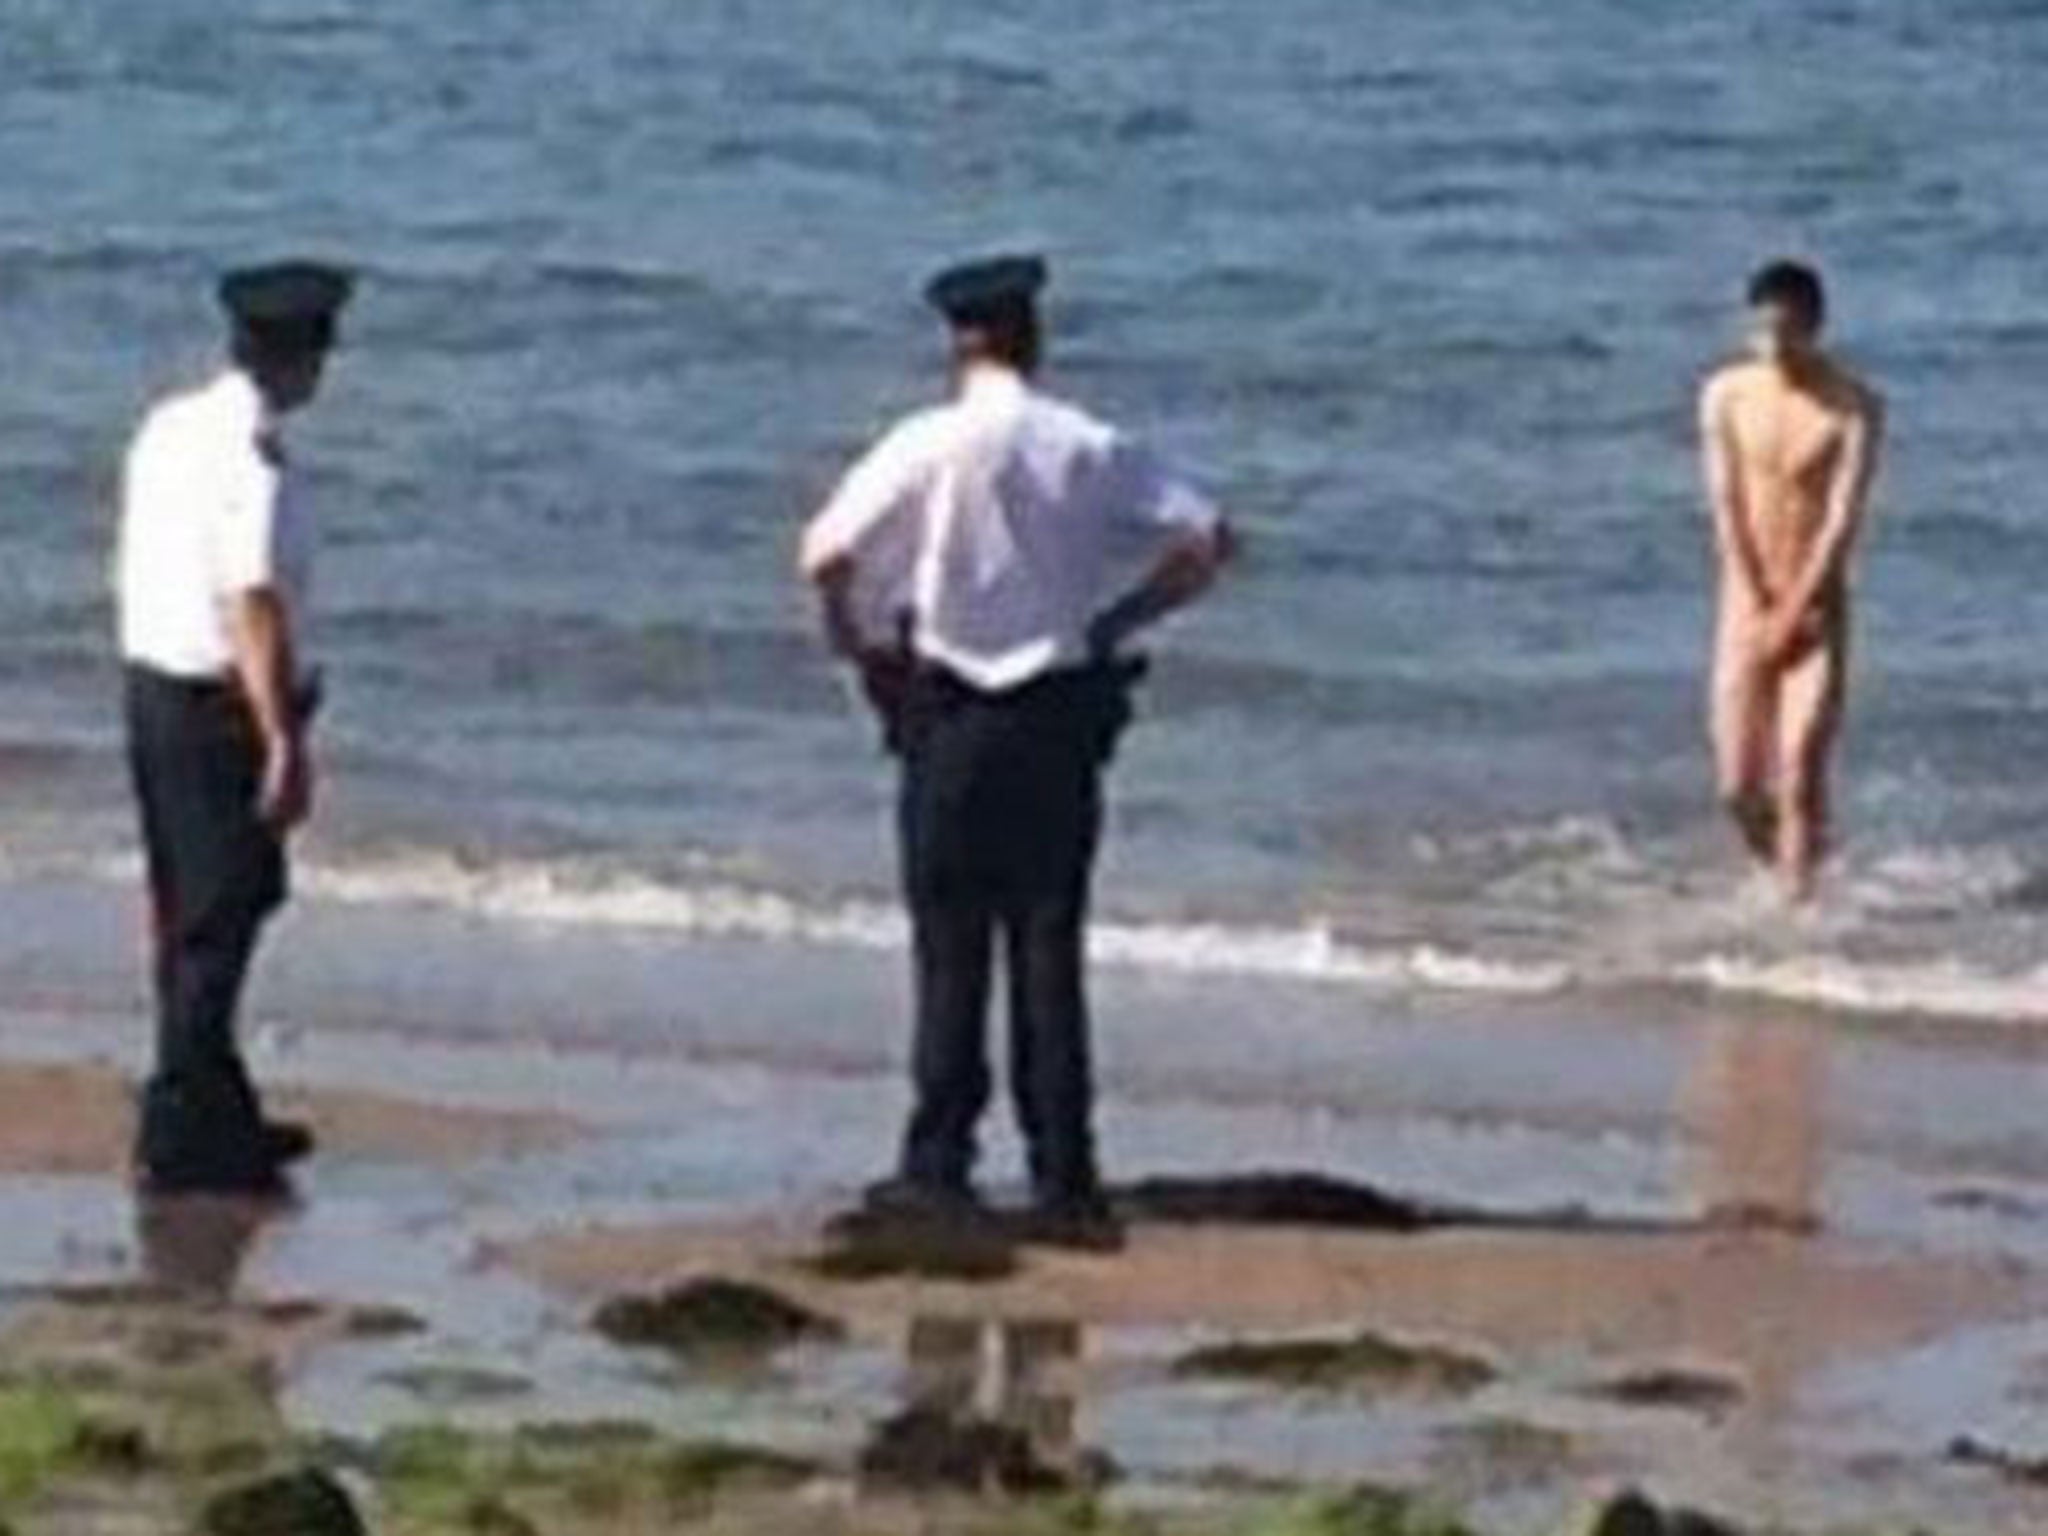 Gardai wait for the naked man, who had gone for a skinny dip in Belfast Lough